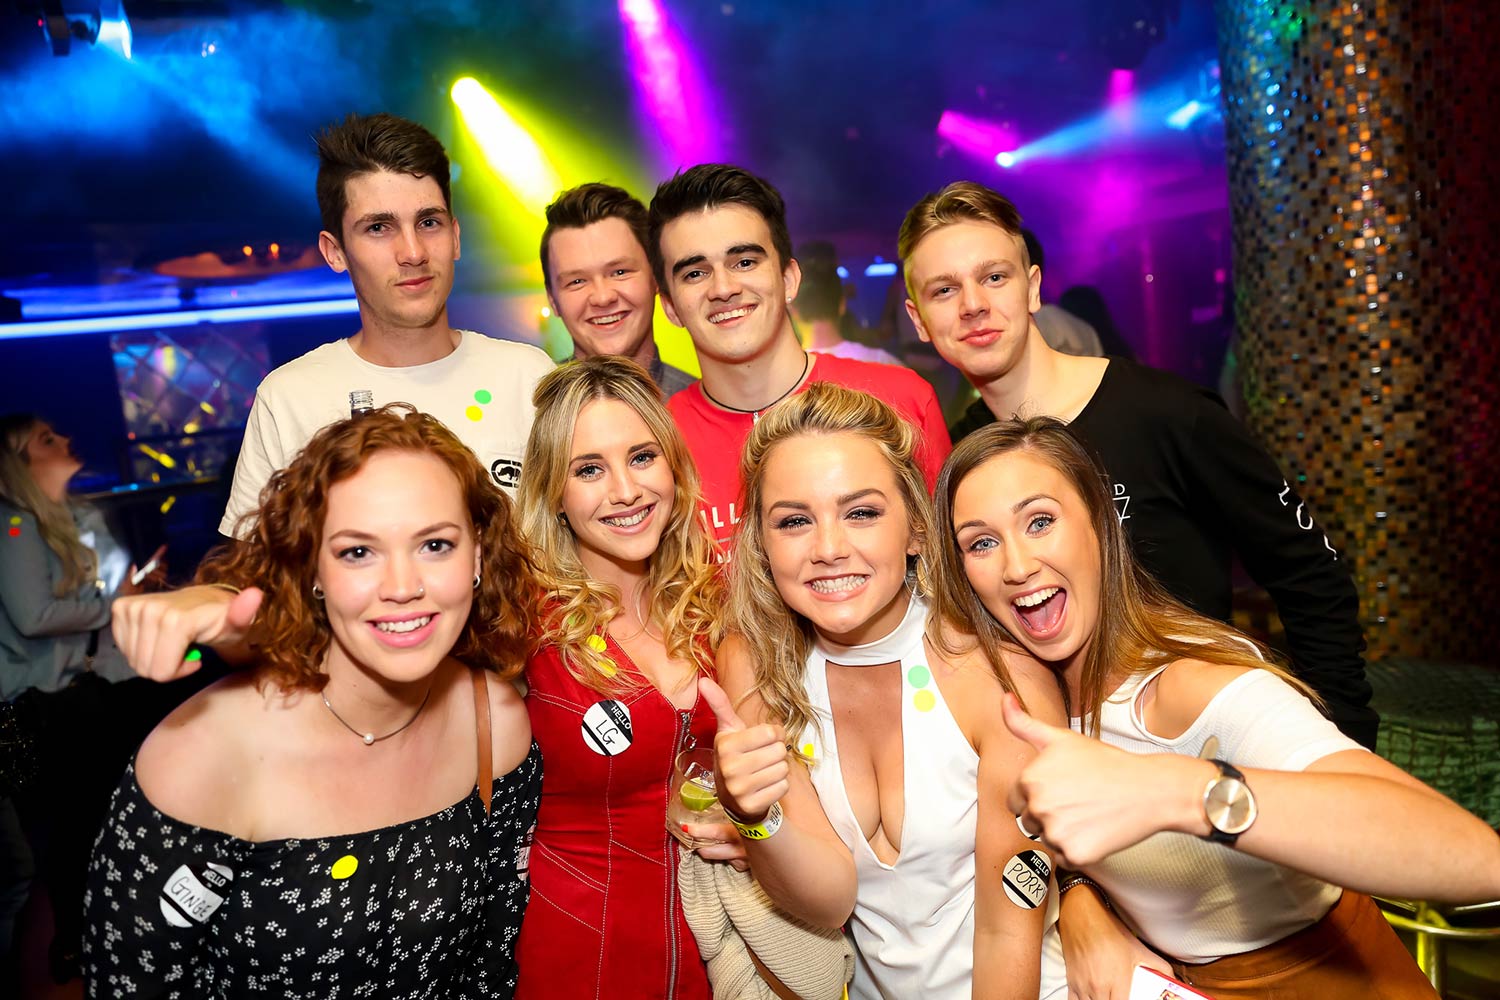 queenstown pub crawl with big night out + go-karting package ideas